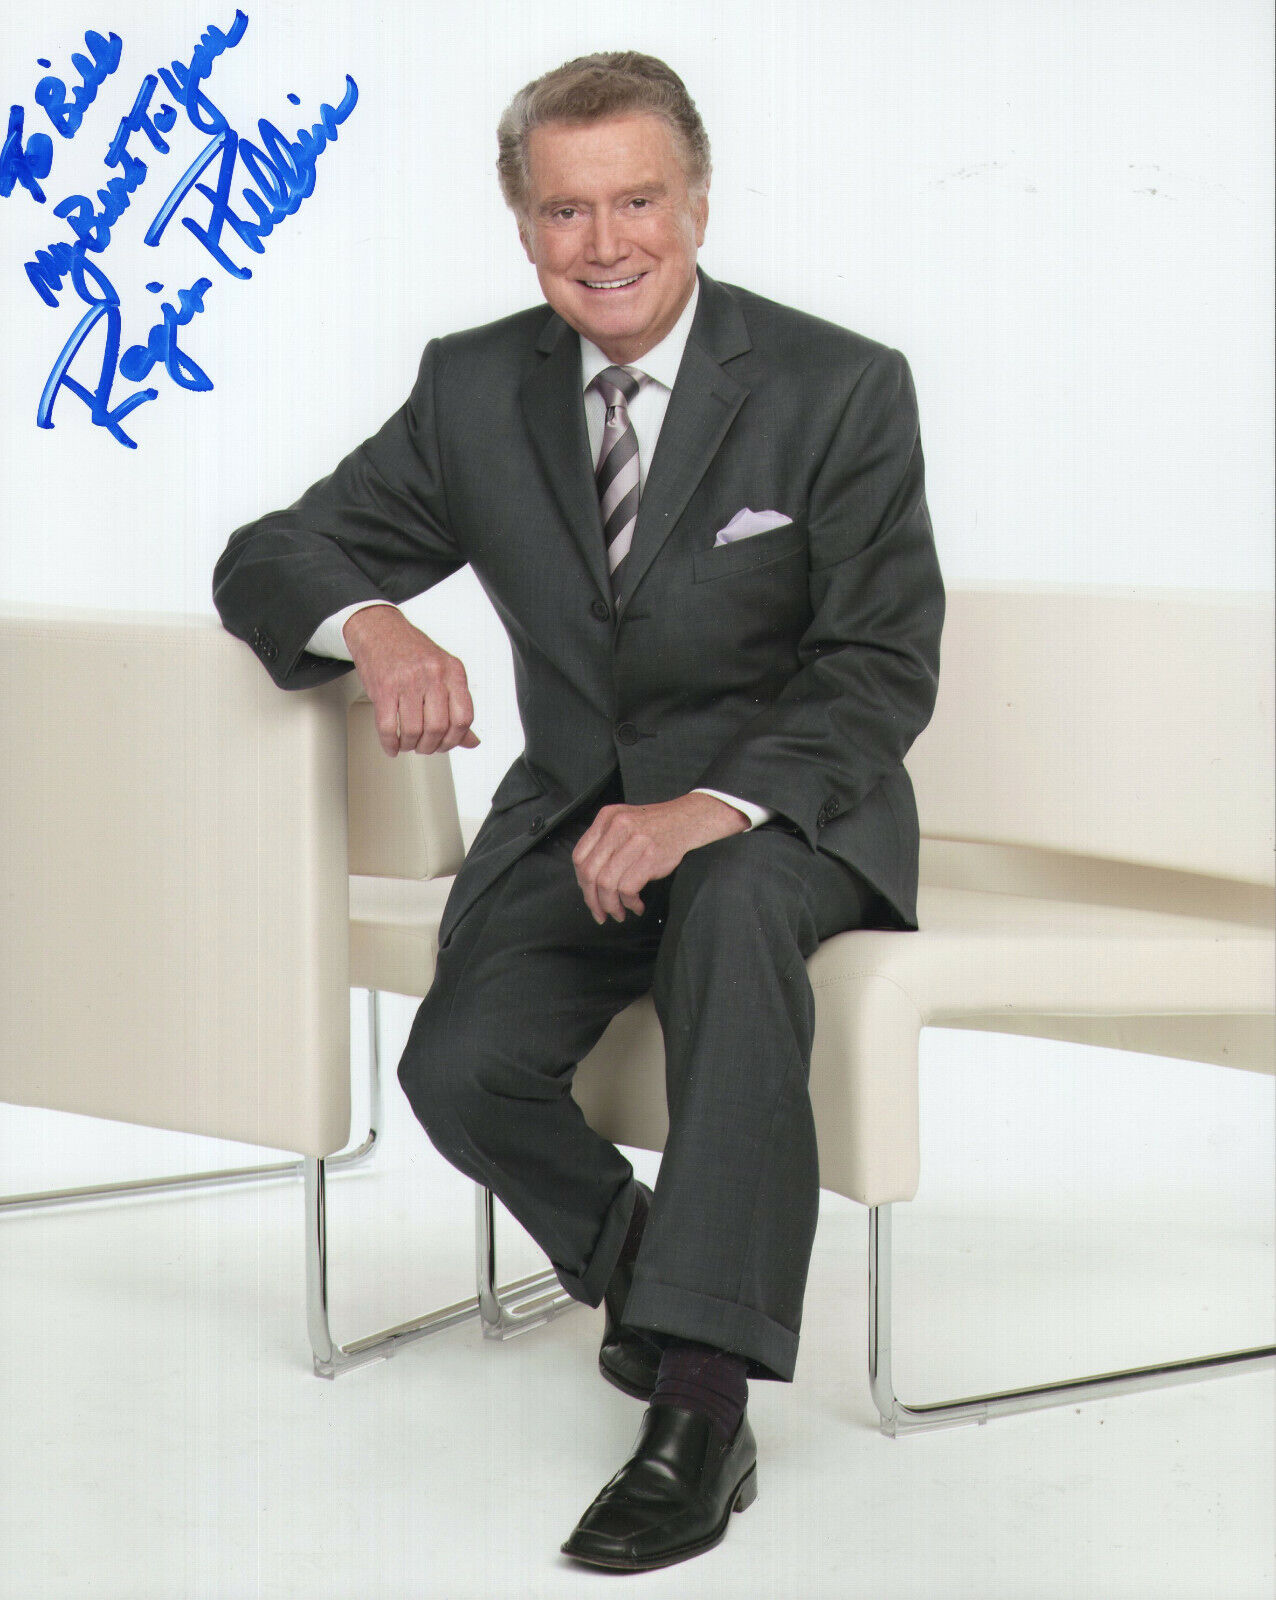 REGIS PHILBIN authentic hand signed 8x10 color photo     AWESOME POSE    To Bill